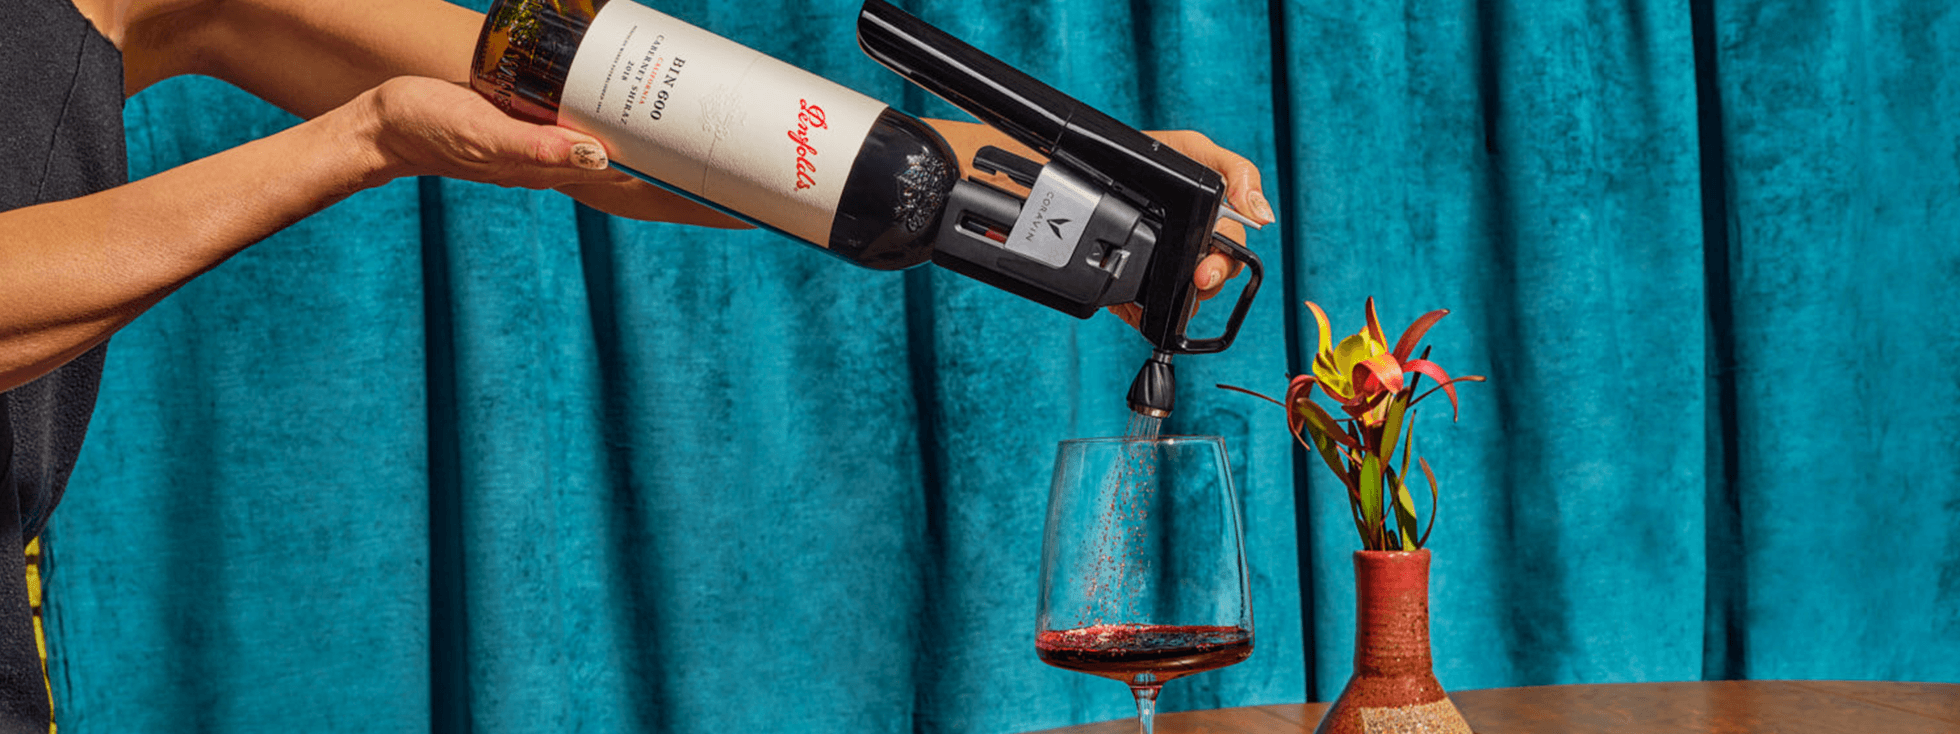 Why-Coravin-is-better-than-any-other-wine-stopper -hero-banner